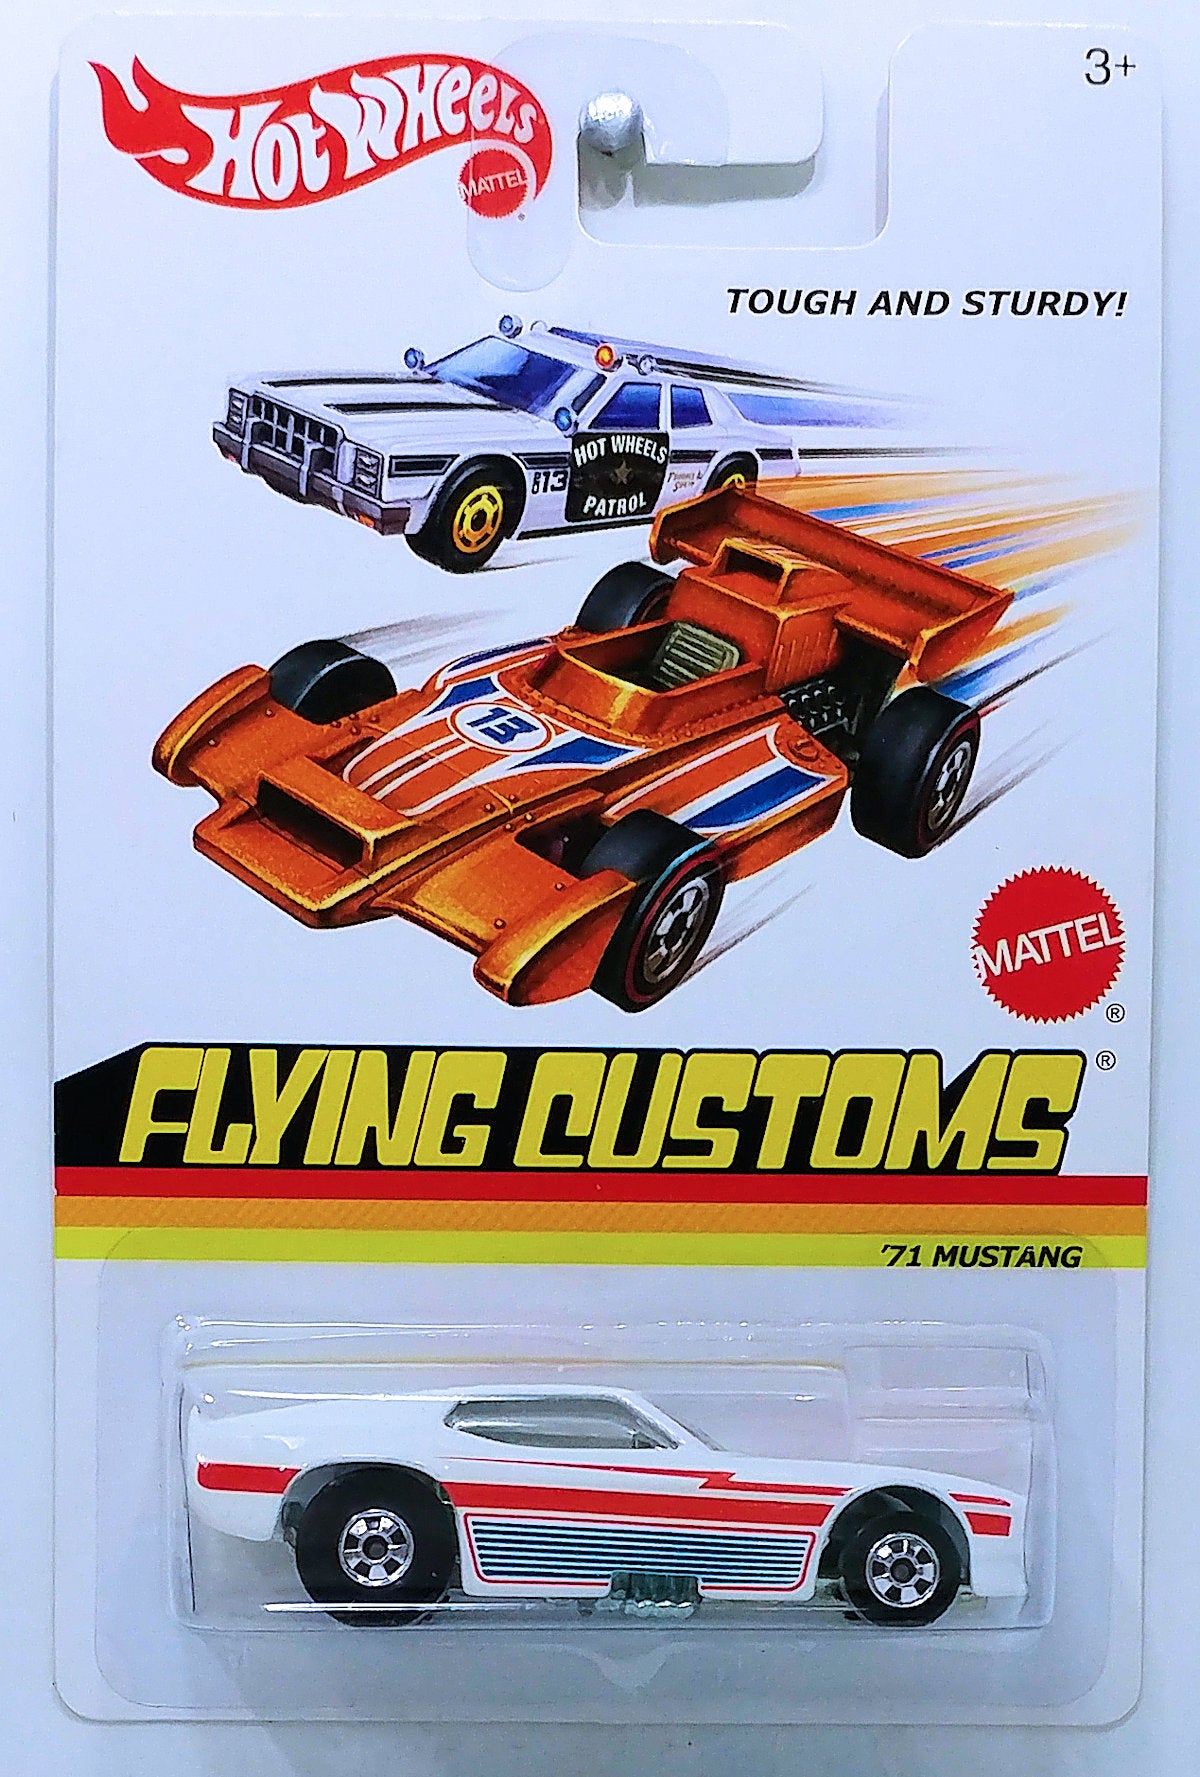 Hot Wheels 2013 - Flying Customs / Mix 4 -  '71 Mustang (Funny Car) - White / Red & Blue Stripes - Basic Wheels - Metal/Metal - Flip Up Body - Target Exclusive